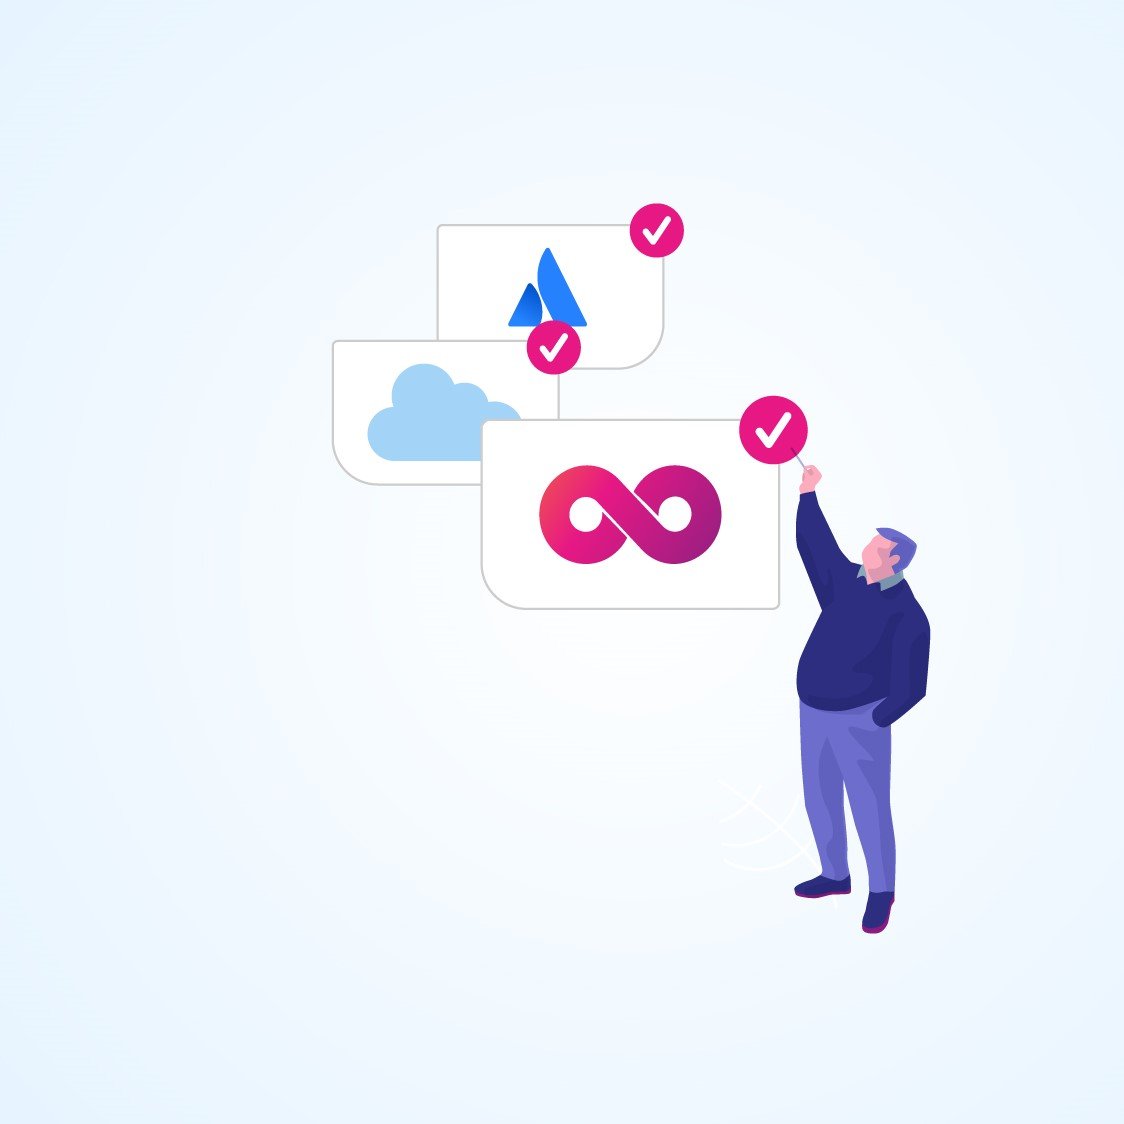 Contact DEISER to boost your DevOps experience using Atlassian Cloud tools